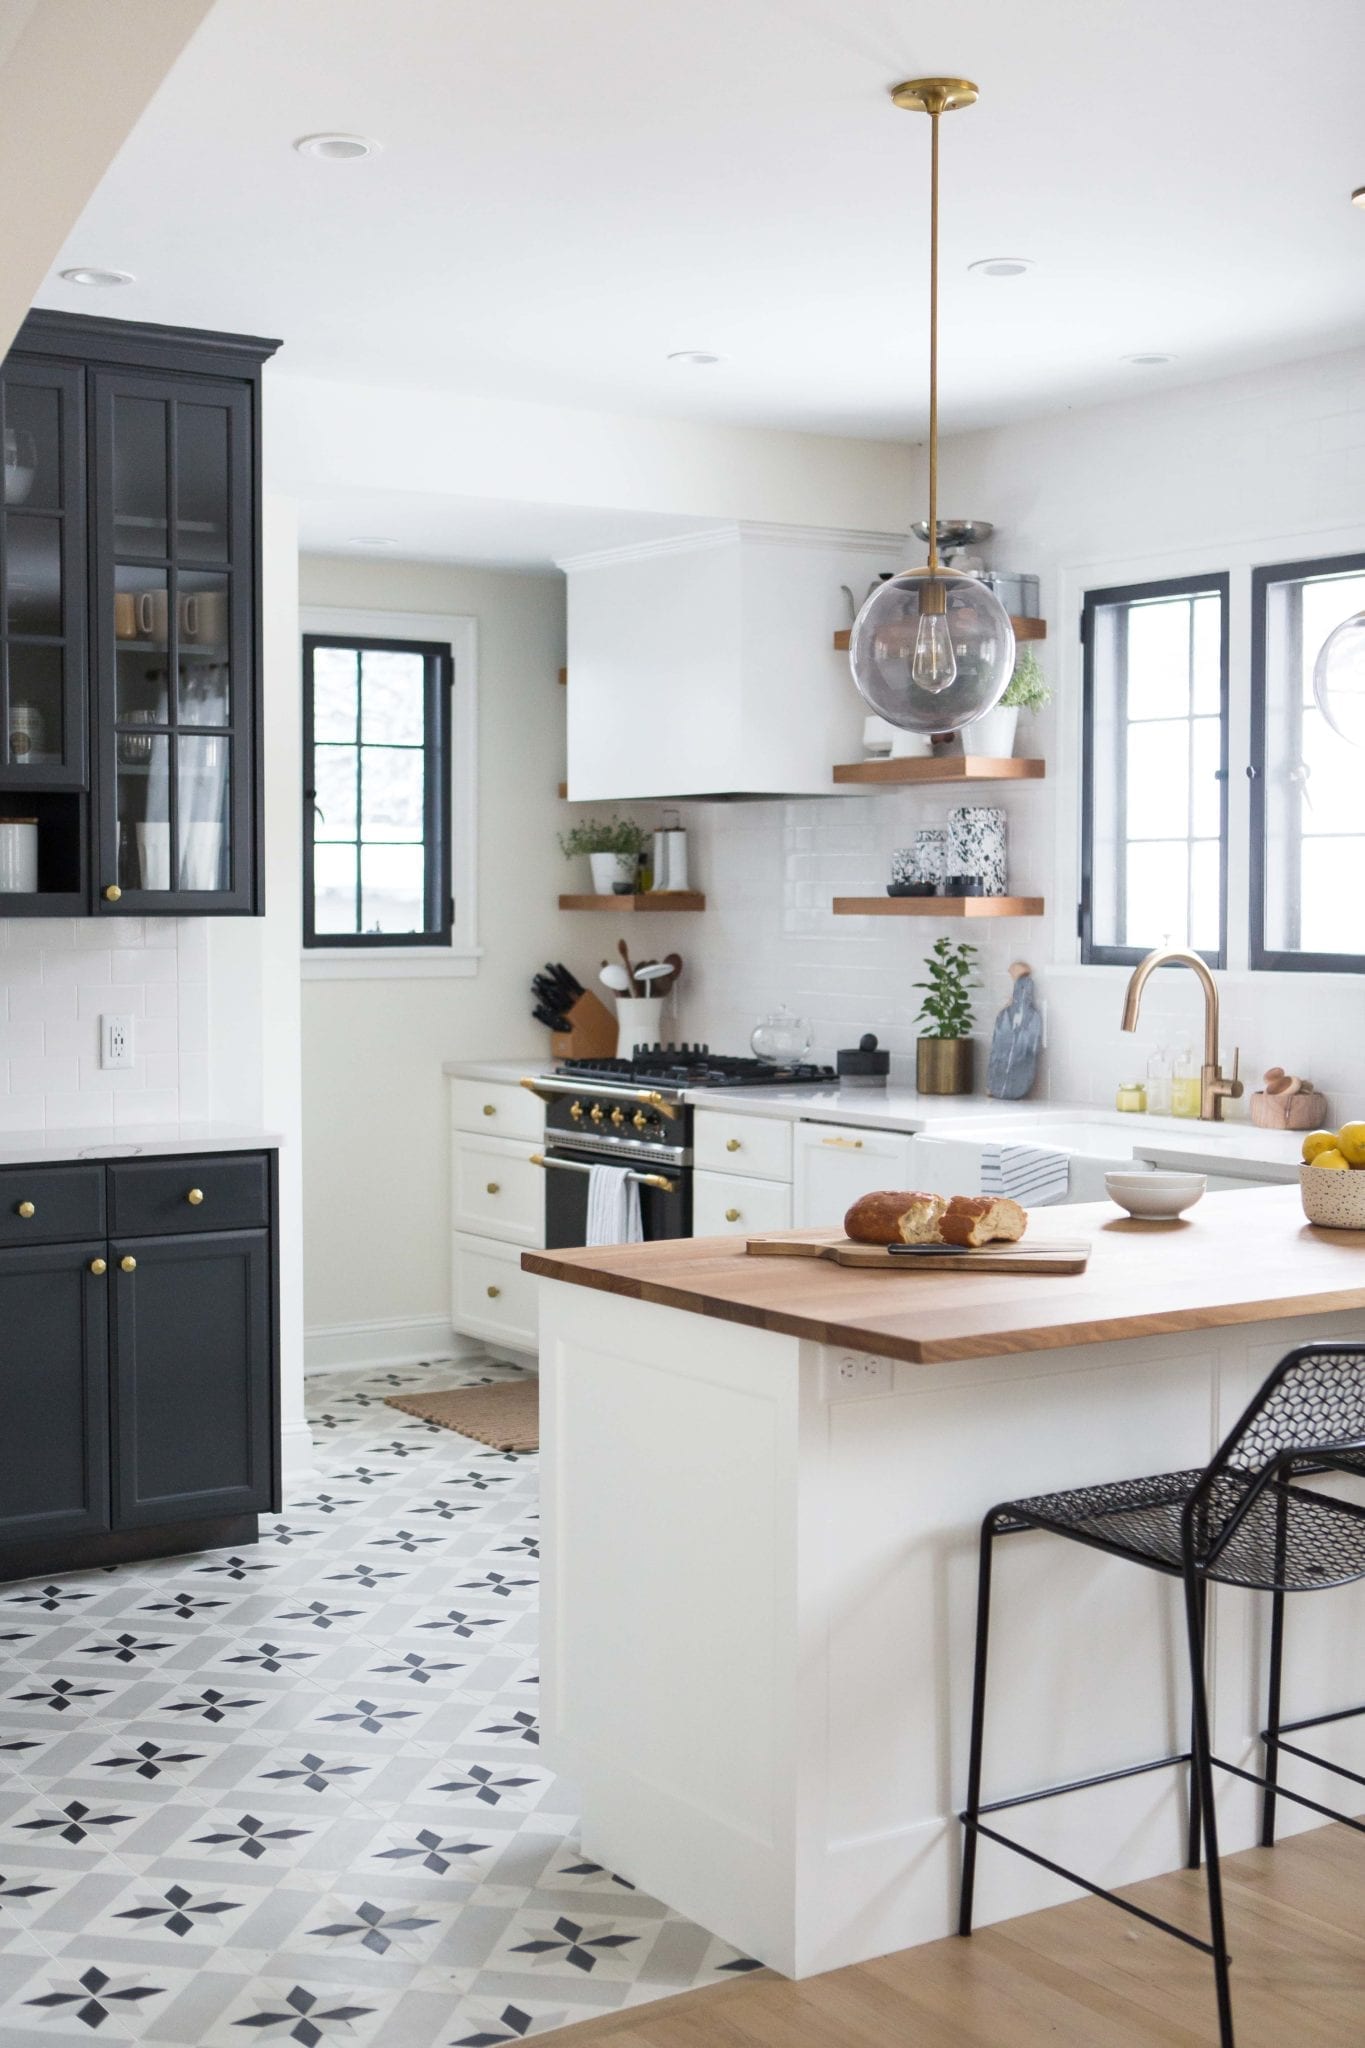 Kitchen Remodel Regrets and What I'd Do Differently Now